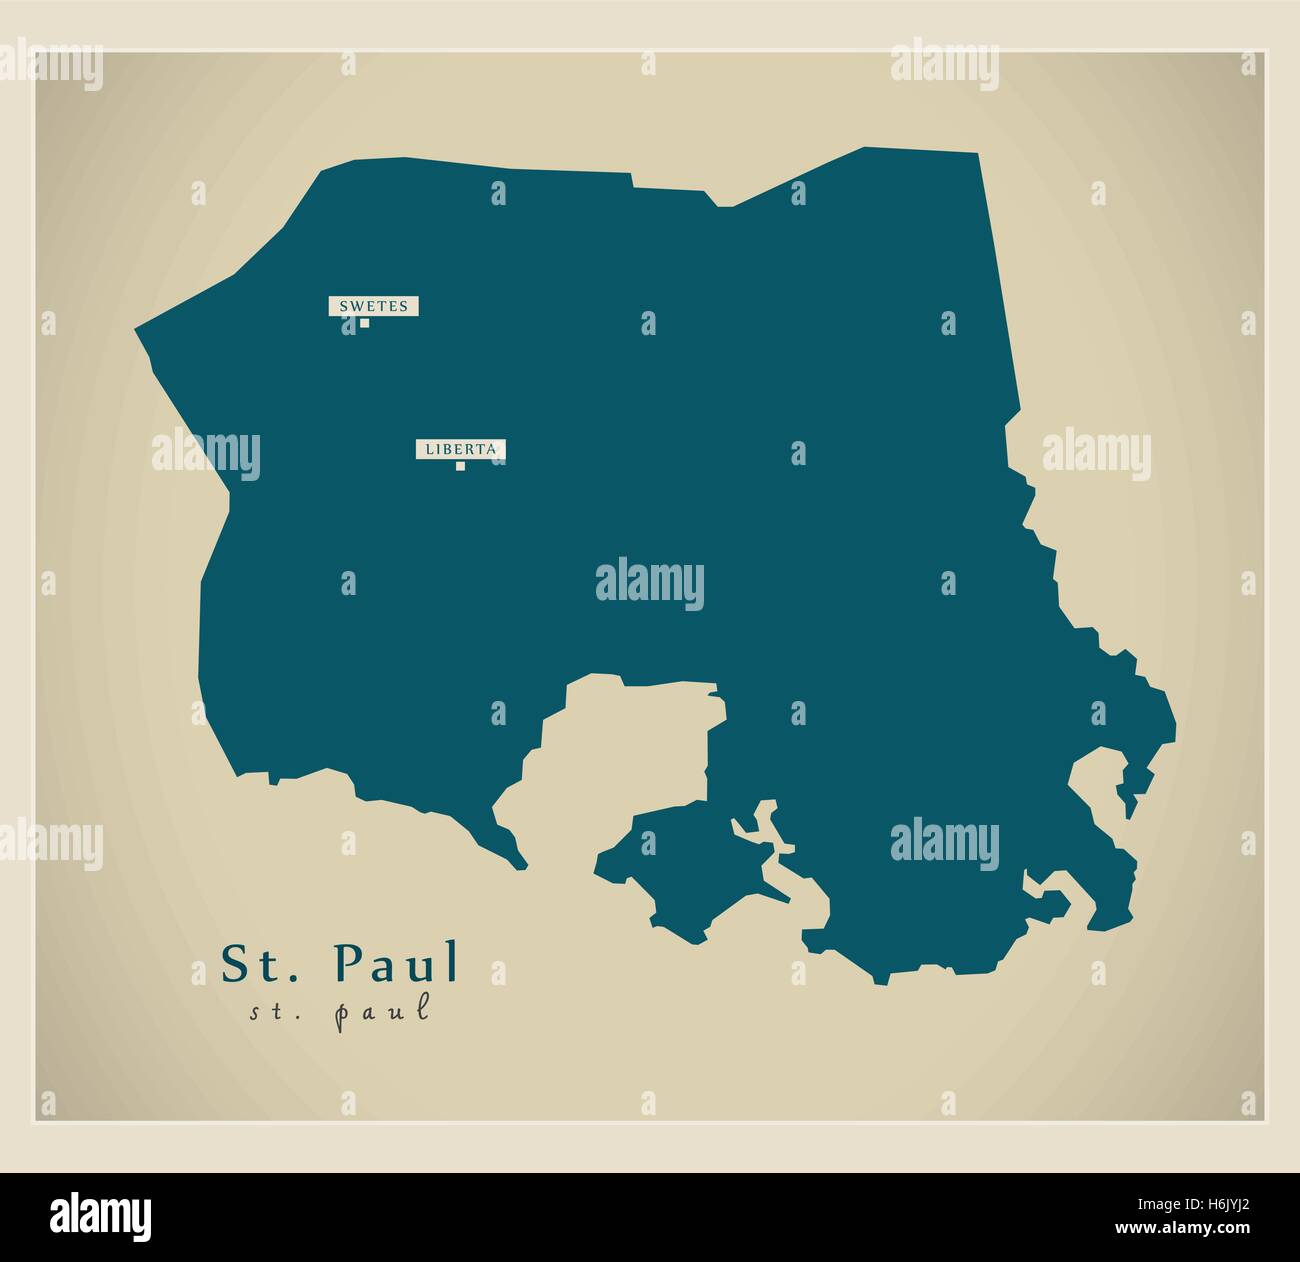 US State Maps Clipart-st paul minnesota state us map with capital